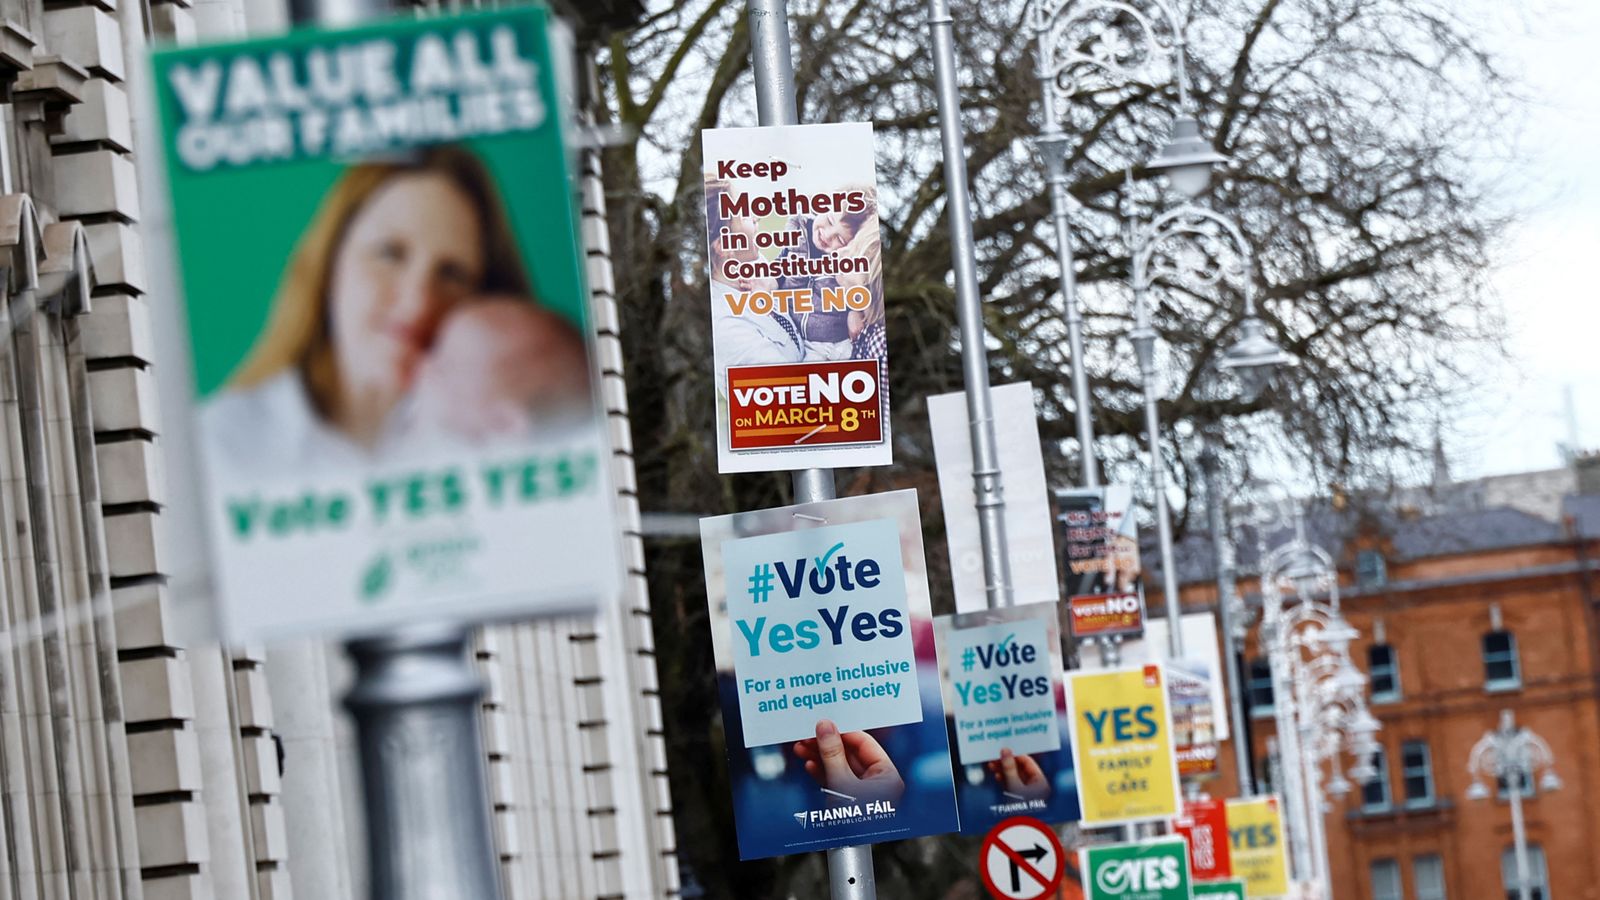 International Women's Day: Ireland votes on scrapping 'sexist' language from constitution